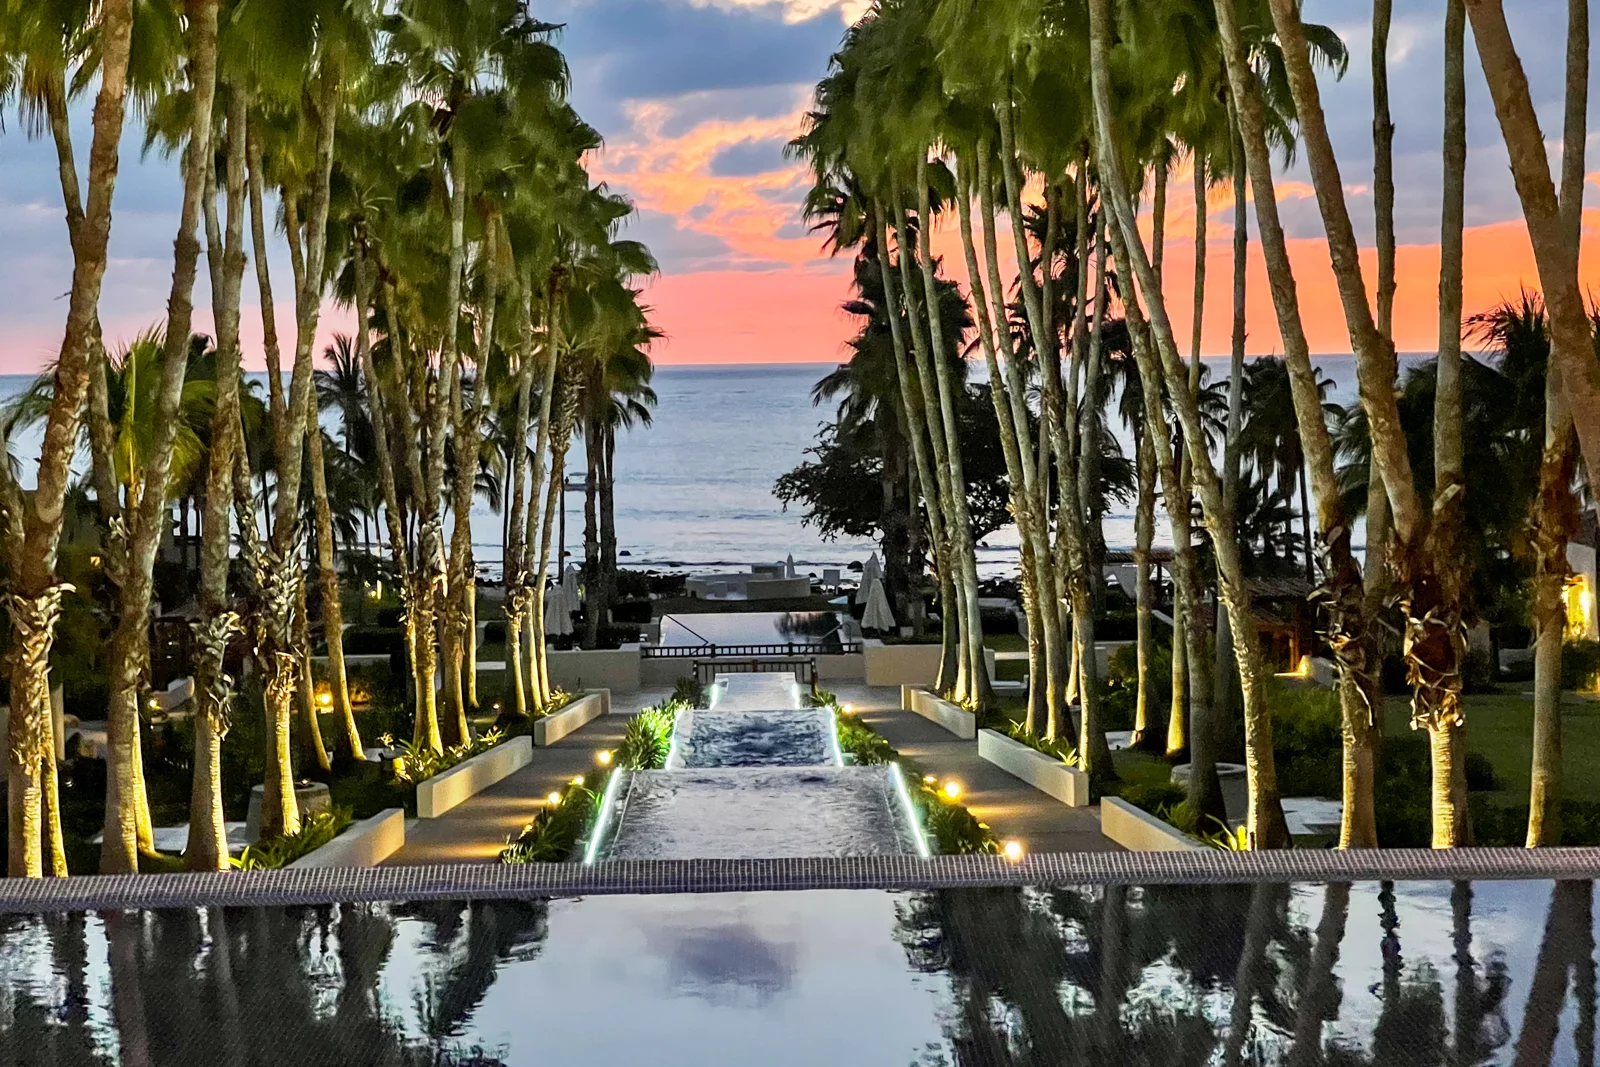 This resort will restore your trust in the hospitality industry, and its name is the St. Regis Punta Mita.